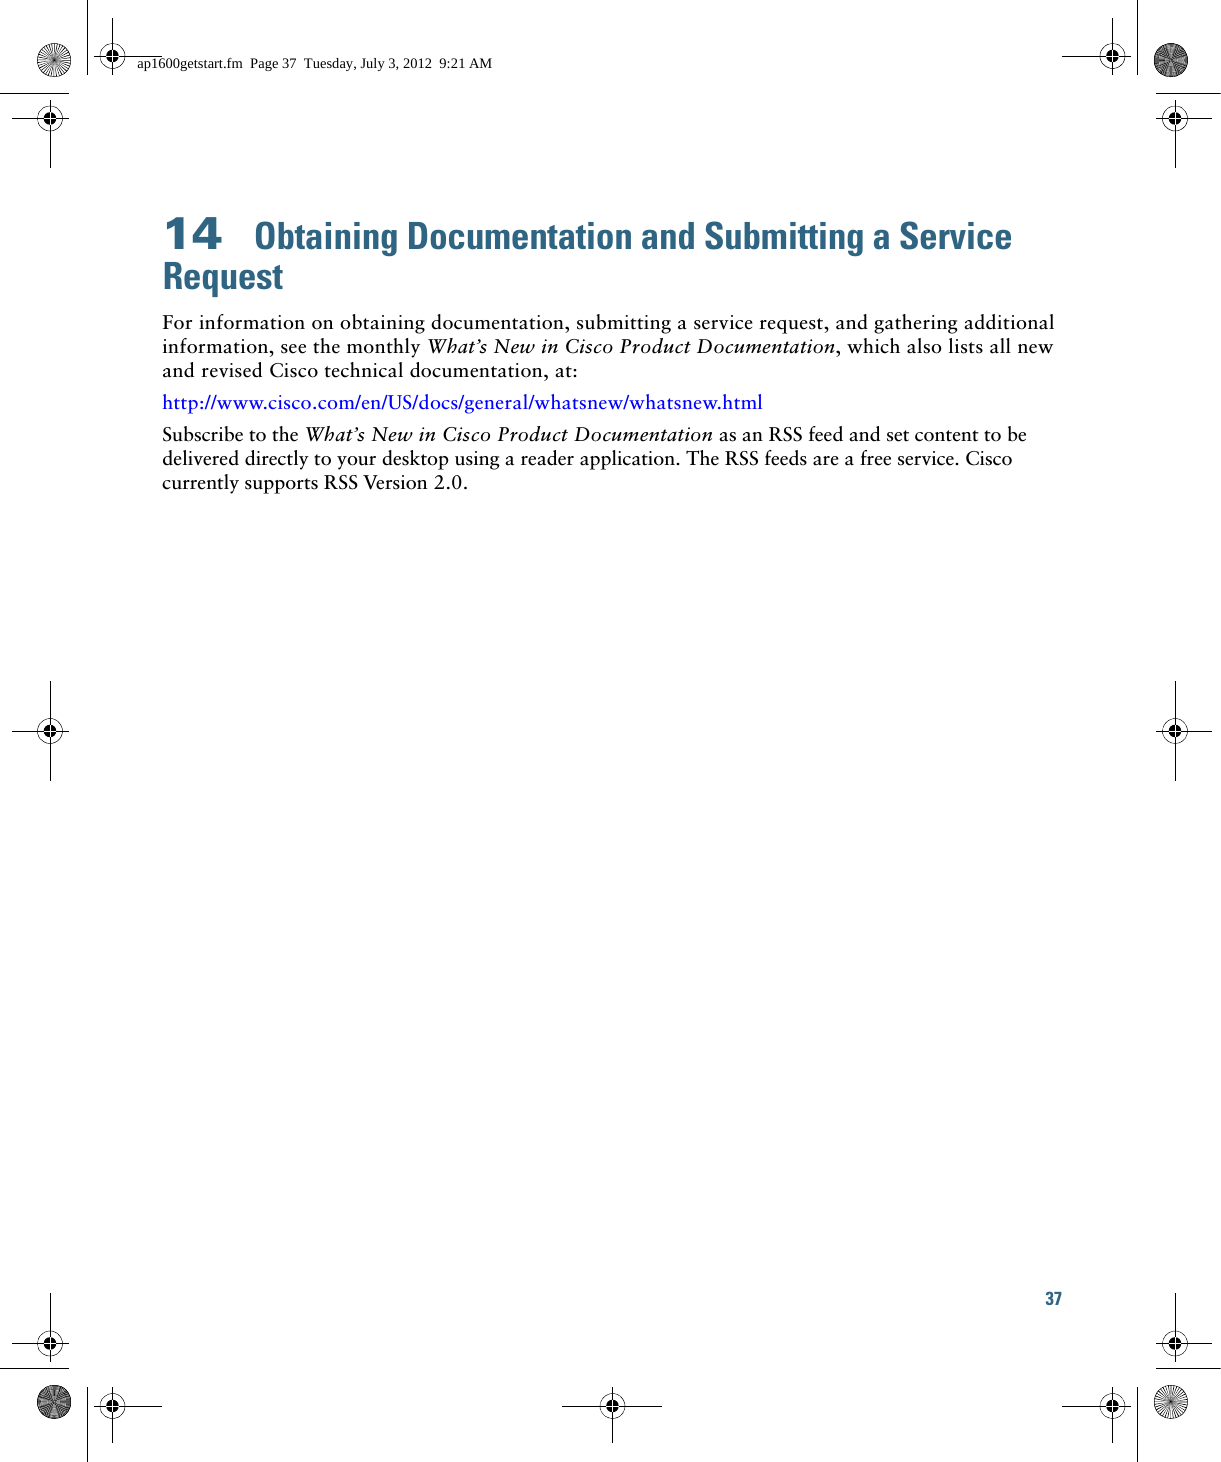 37 14  Obtaining Documentation and Submitting a Service RequestFor information on obtaining documentation, submitting a service request, and gathering additional information, see the monthly What’s New in Cisco Product Documentation, which also lists all new and revised Cisco technical documentation, at:http://www.cisco.com/en/US/docs/general/whatsnew/whatsnew.htmlSubscribe to the What’s New in Cisco Product Documentation as an RSS feed and set content to be delivered directly to your desktop using a reader application. The RSS feeds are a free service. Cisco currently supports RSS Version  2.0.ap1600getstart.fm  Page 37  Tuesday, July 3, 2012  9:21 AM